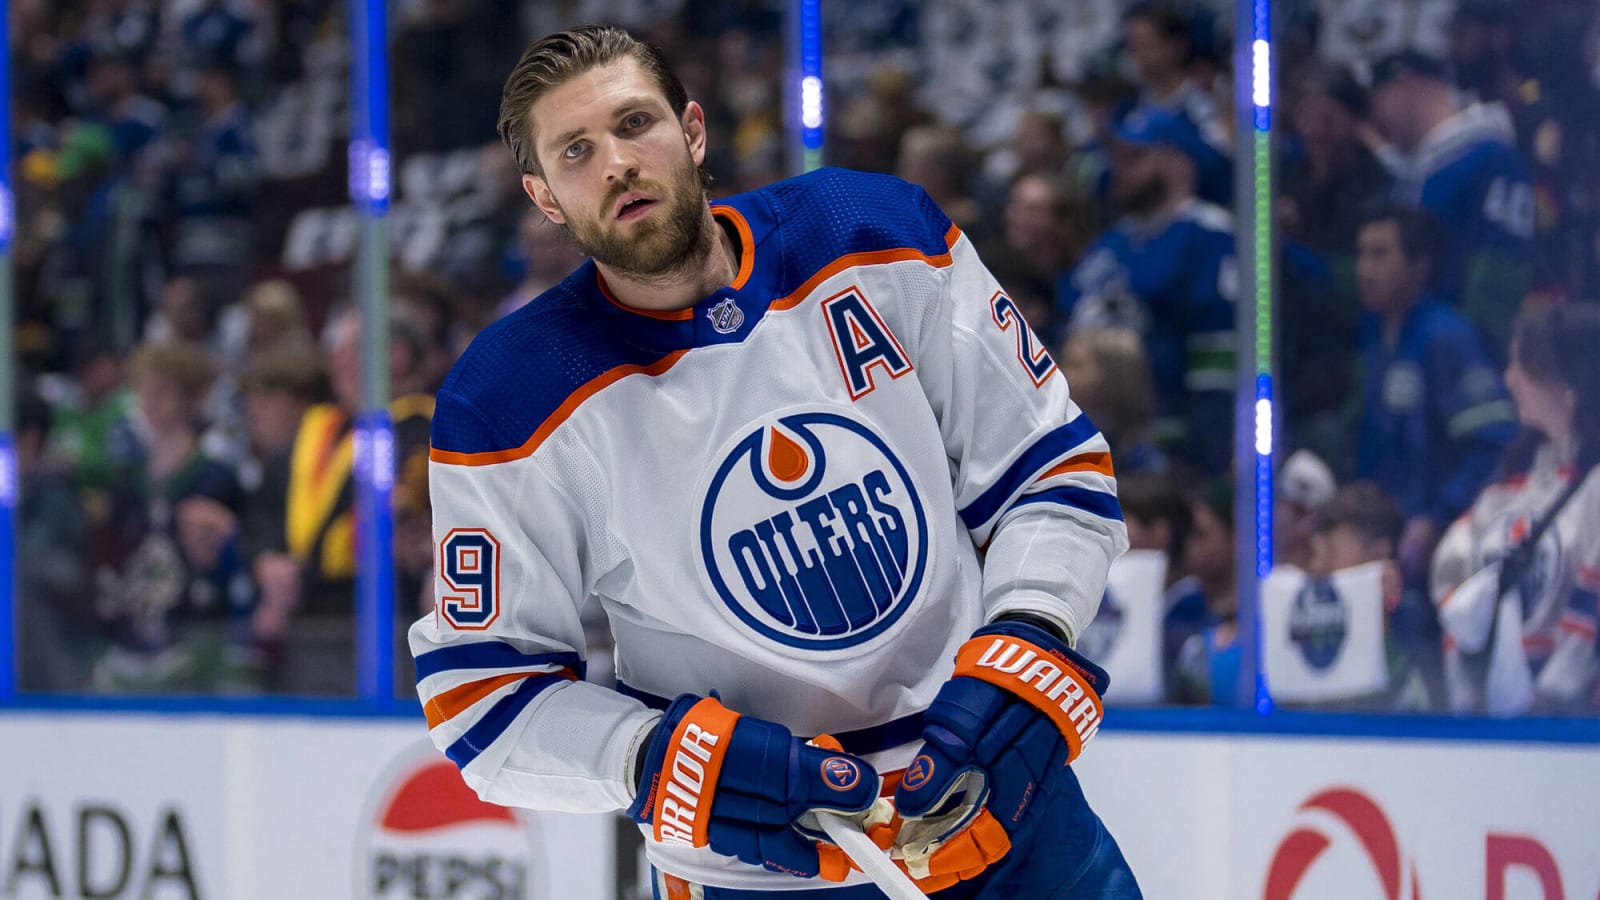 Oilers’ Draisaitl dealt with cramping during Game 1 against Canucks